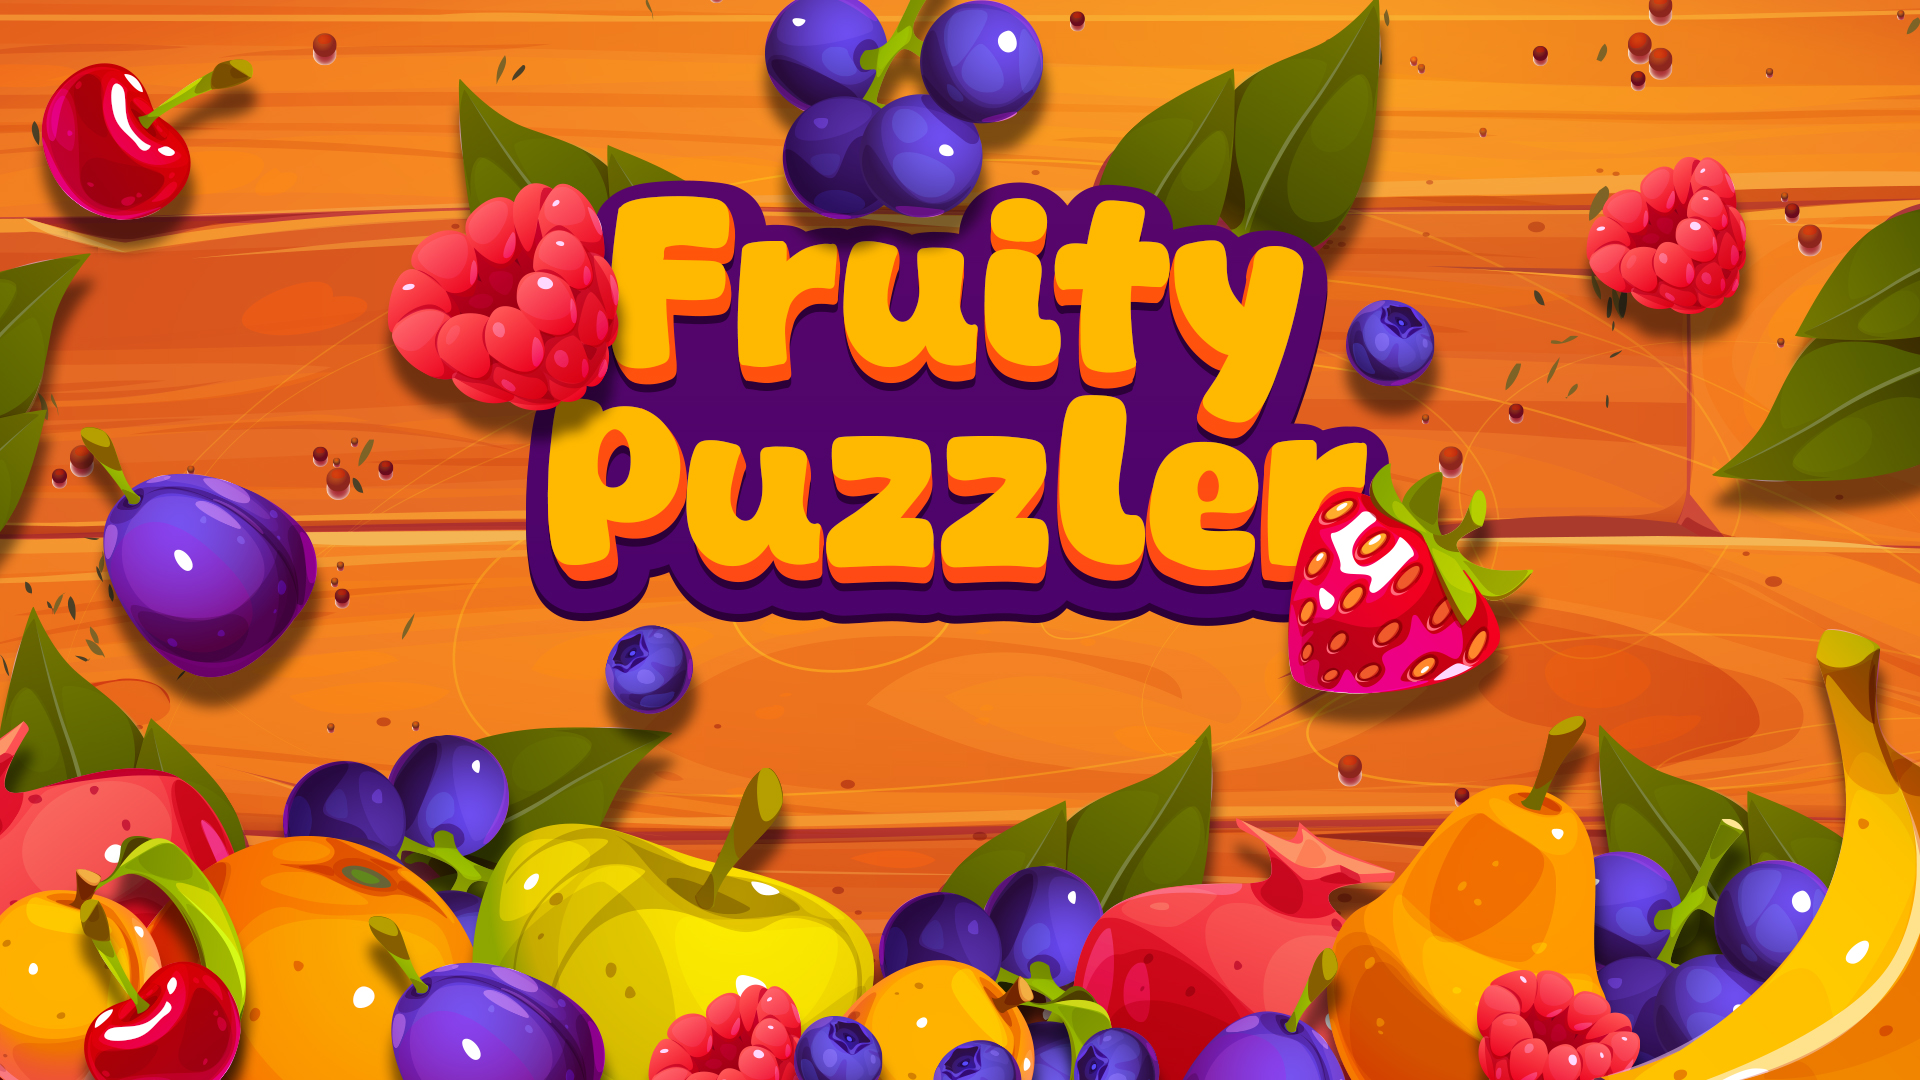 Fruity Puzzler